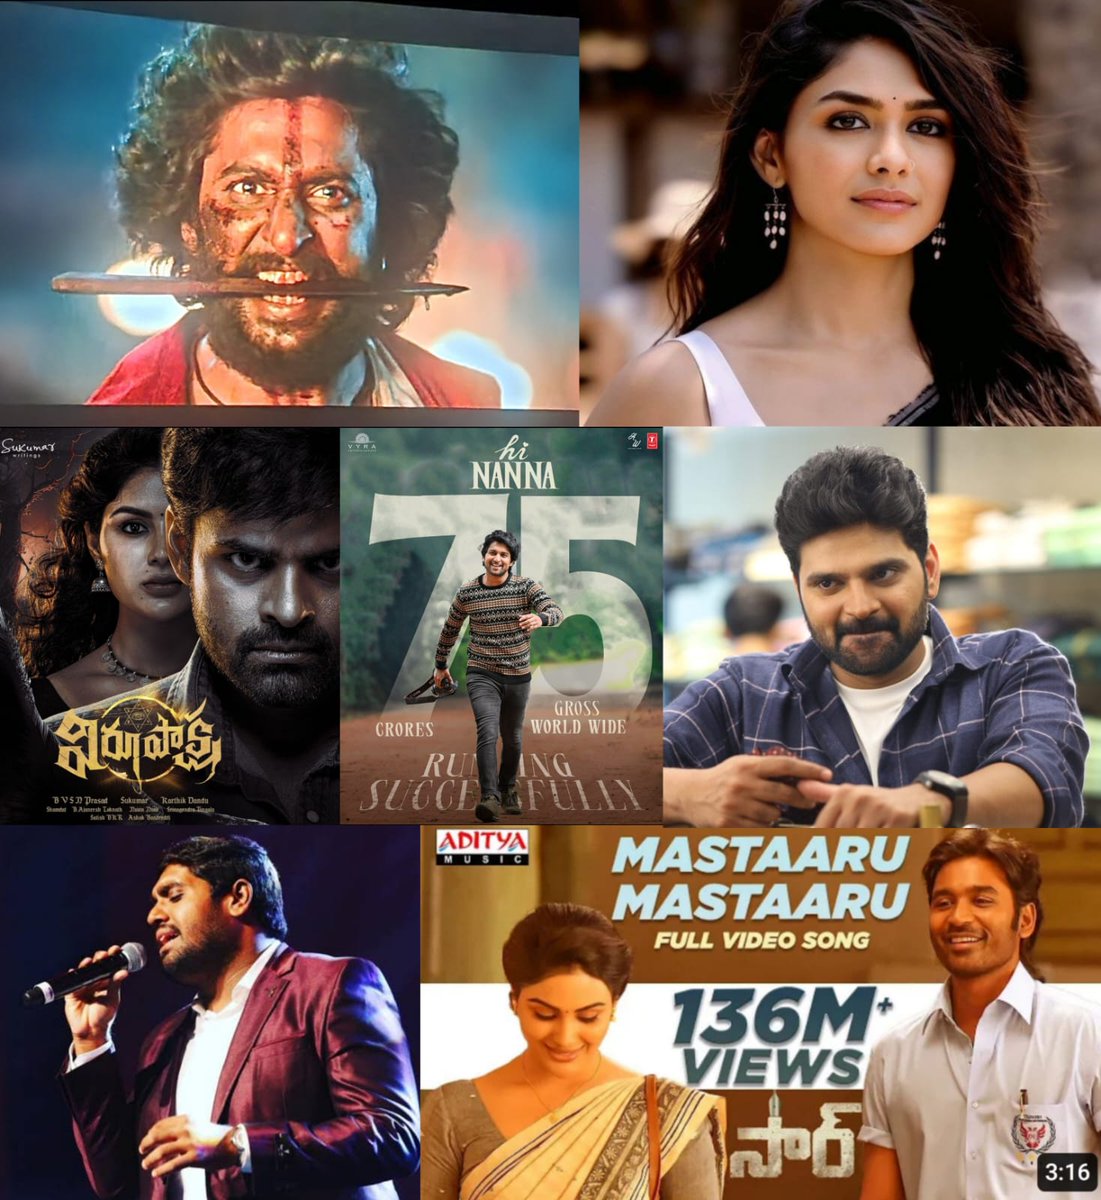 Tollywood - Best Of 2023 Winners Best Actor of the Year - #Nani (#Dasara and #HiNanna) Best Actress of the Year - #MrunalThakur (#HiNanna) Film of the Year - #Virupaksha and #HiNanna Entertainer of the Year - #Sreevishnu (#Samajavaragamana) Music director of the Year -…